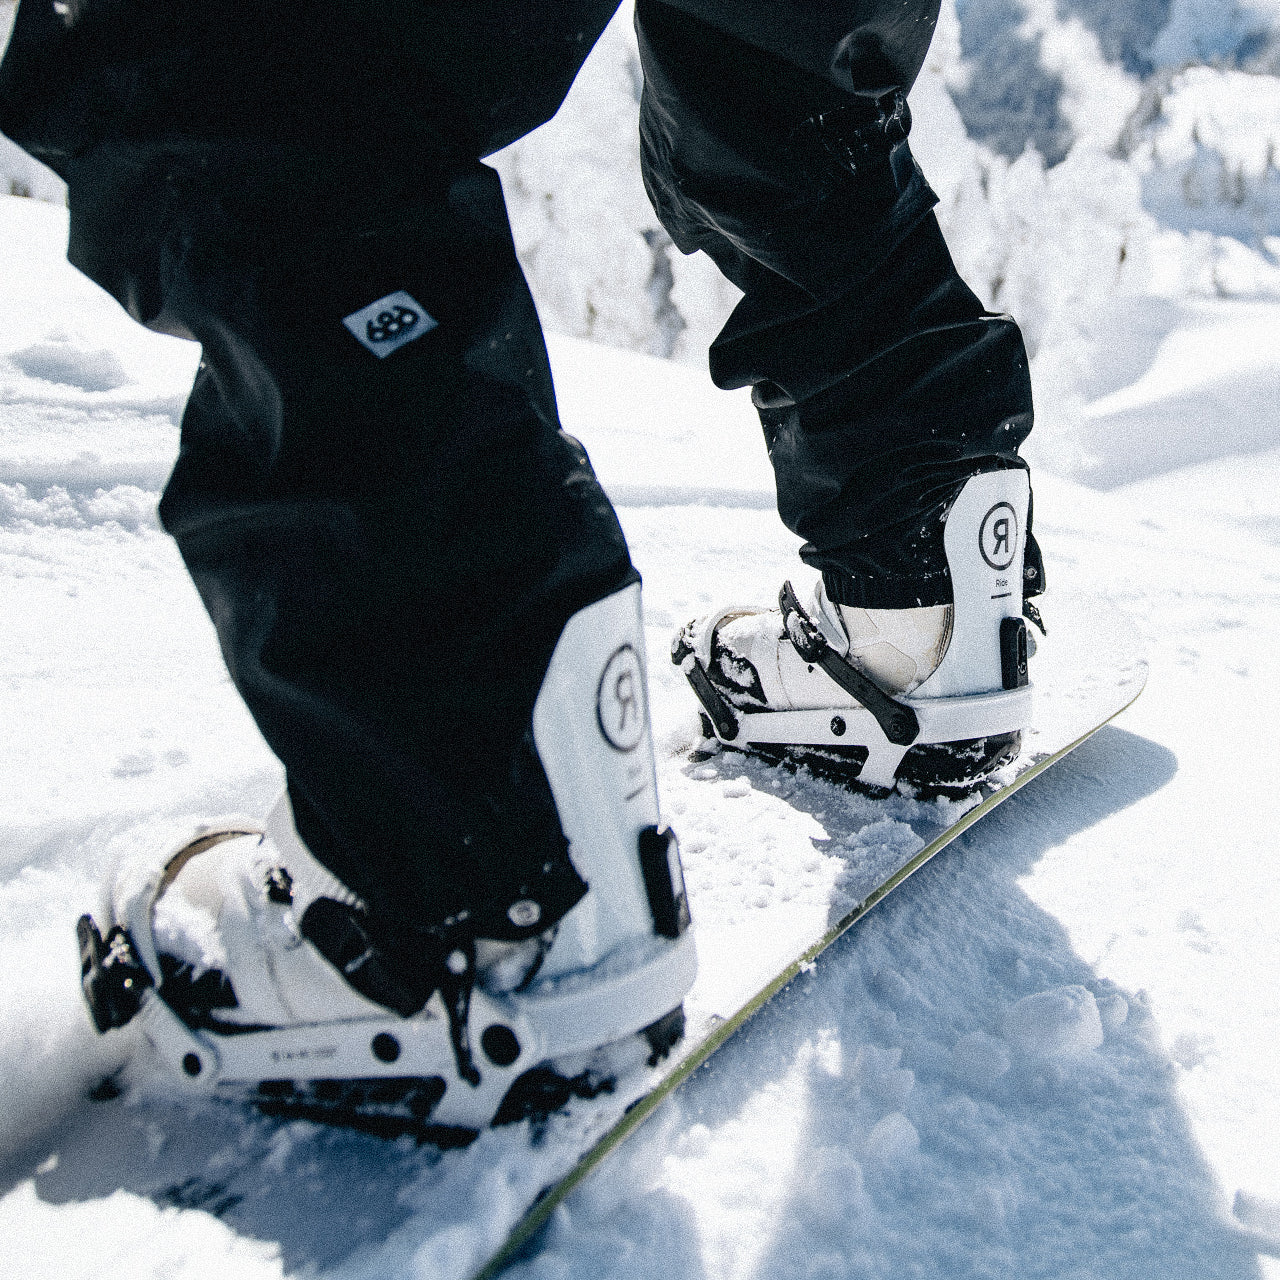 Up to 20% off Ride Snowboards & Gear